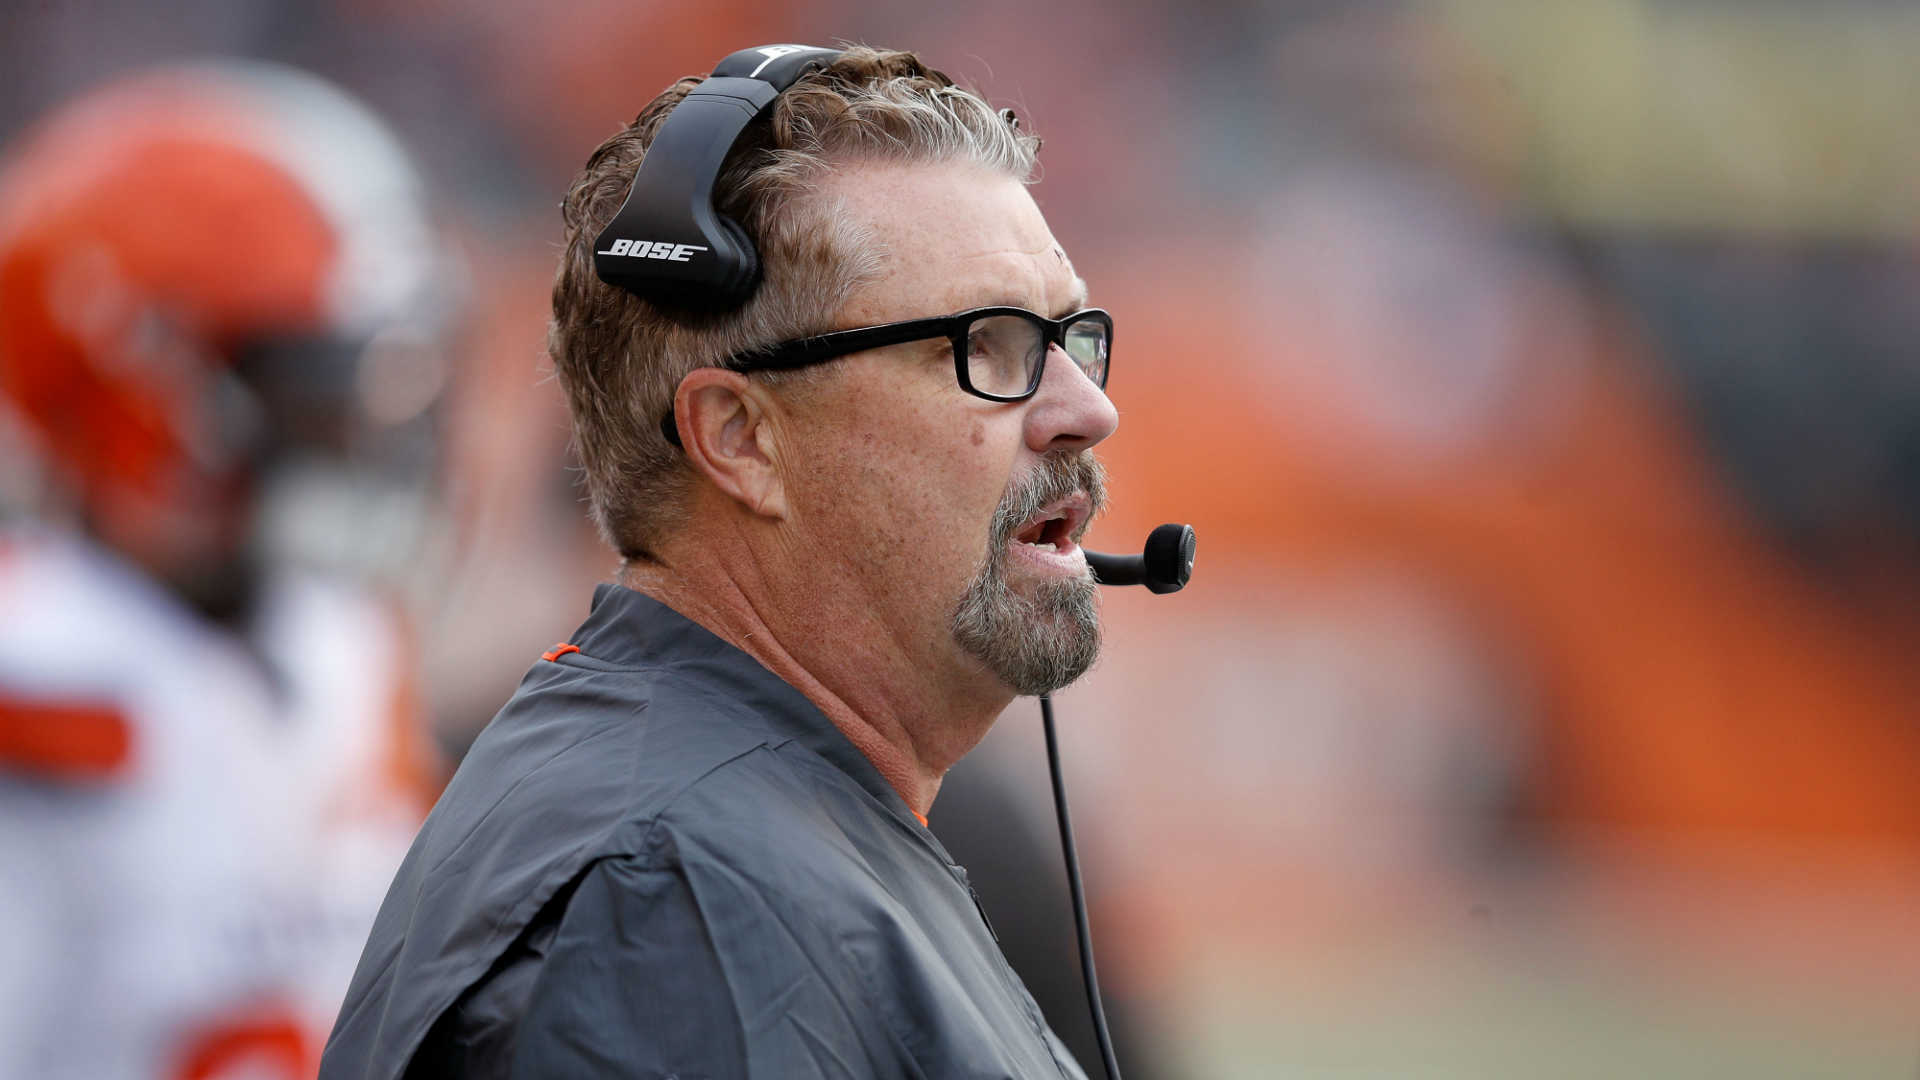 Jets coach Adam Gase: Gregg Williams 'served his time' over 'Bountygate' scandal